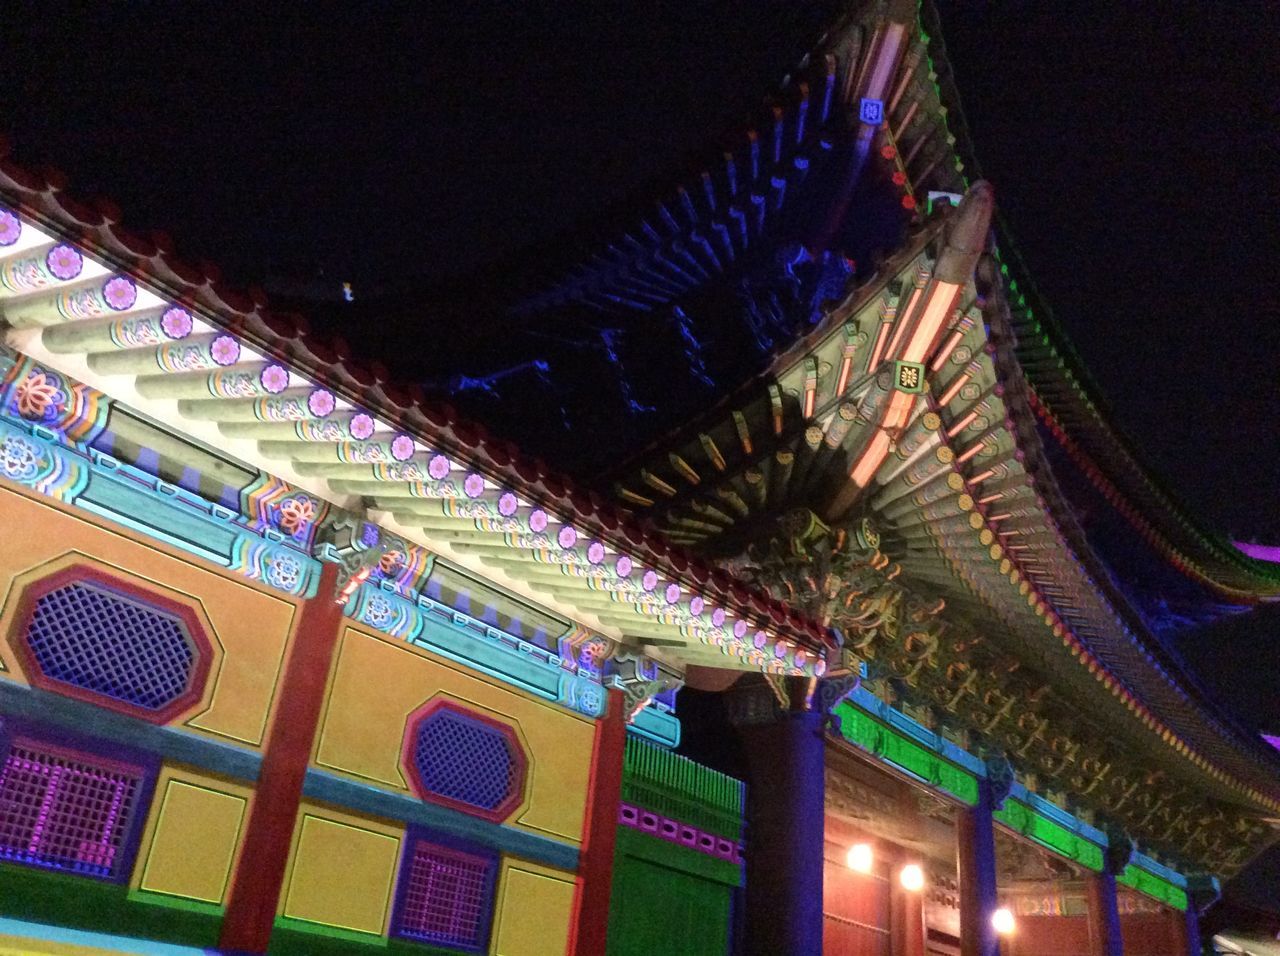 illuminated, night, architecture, low angle view, built structure, multi colored, building exterior, lighting equipment, arts culture and entertainment, roof, pattern, blue, outdoors, architectural feature, cultures, no people, famous place, travel destinations, culture, ceiling